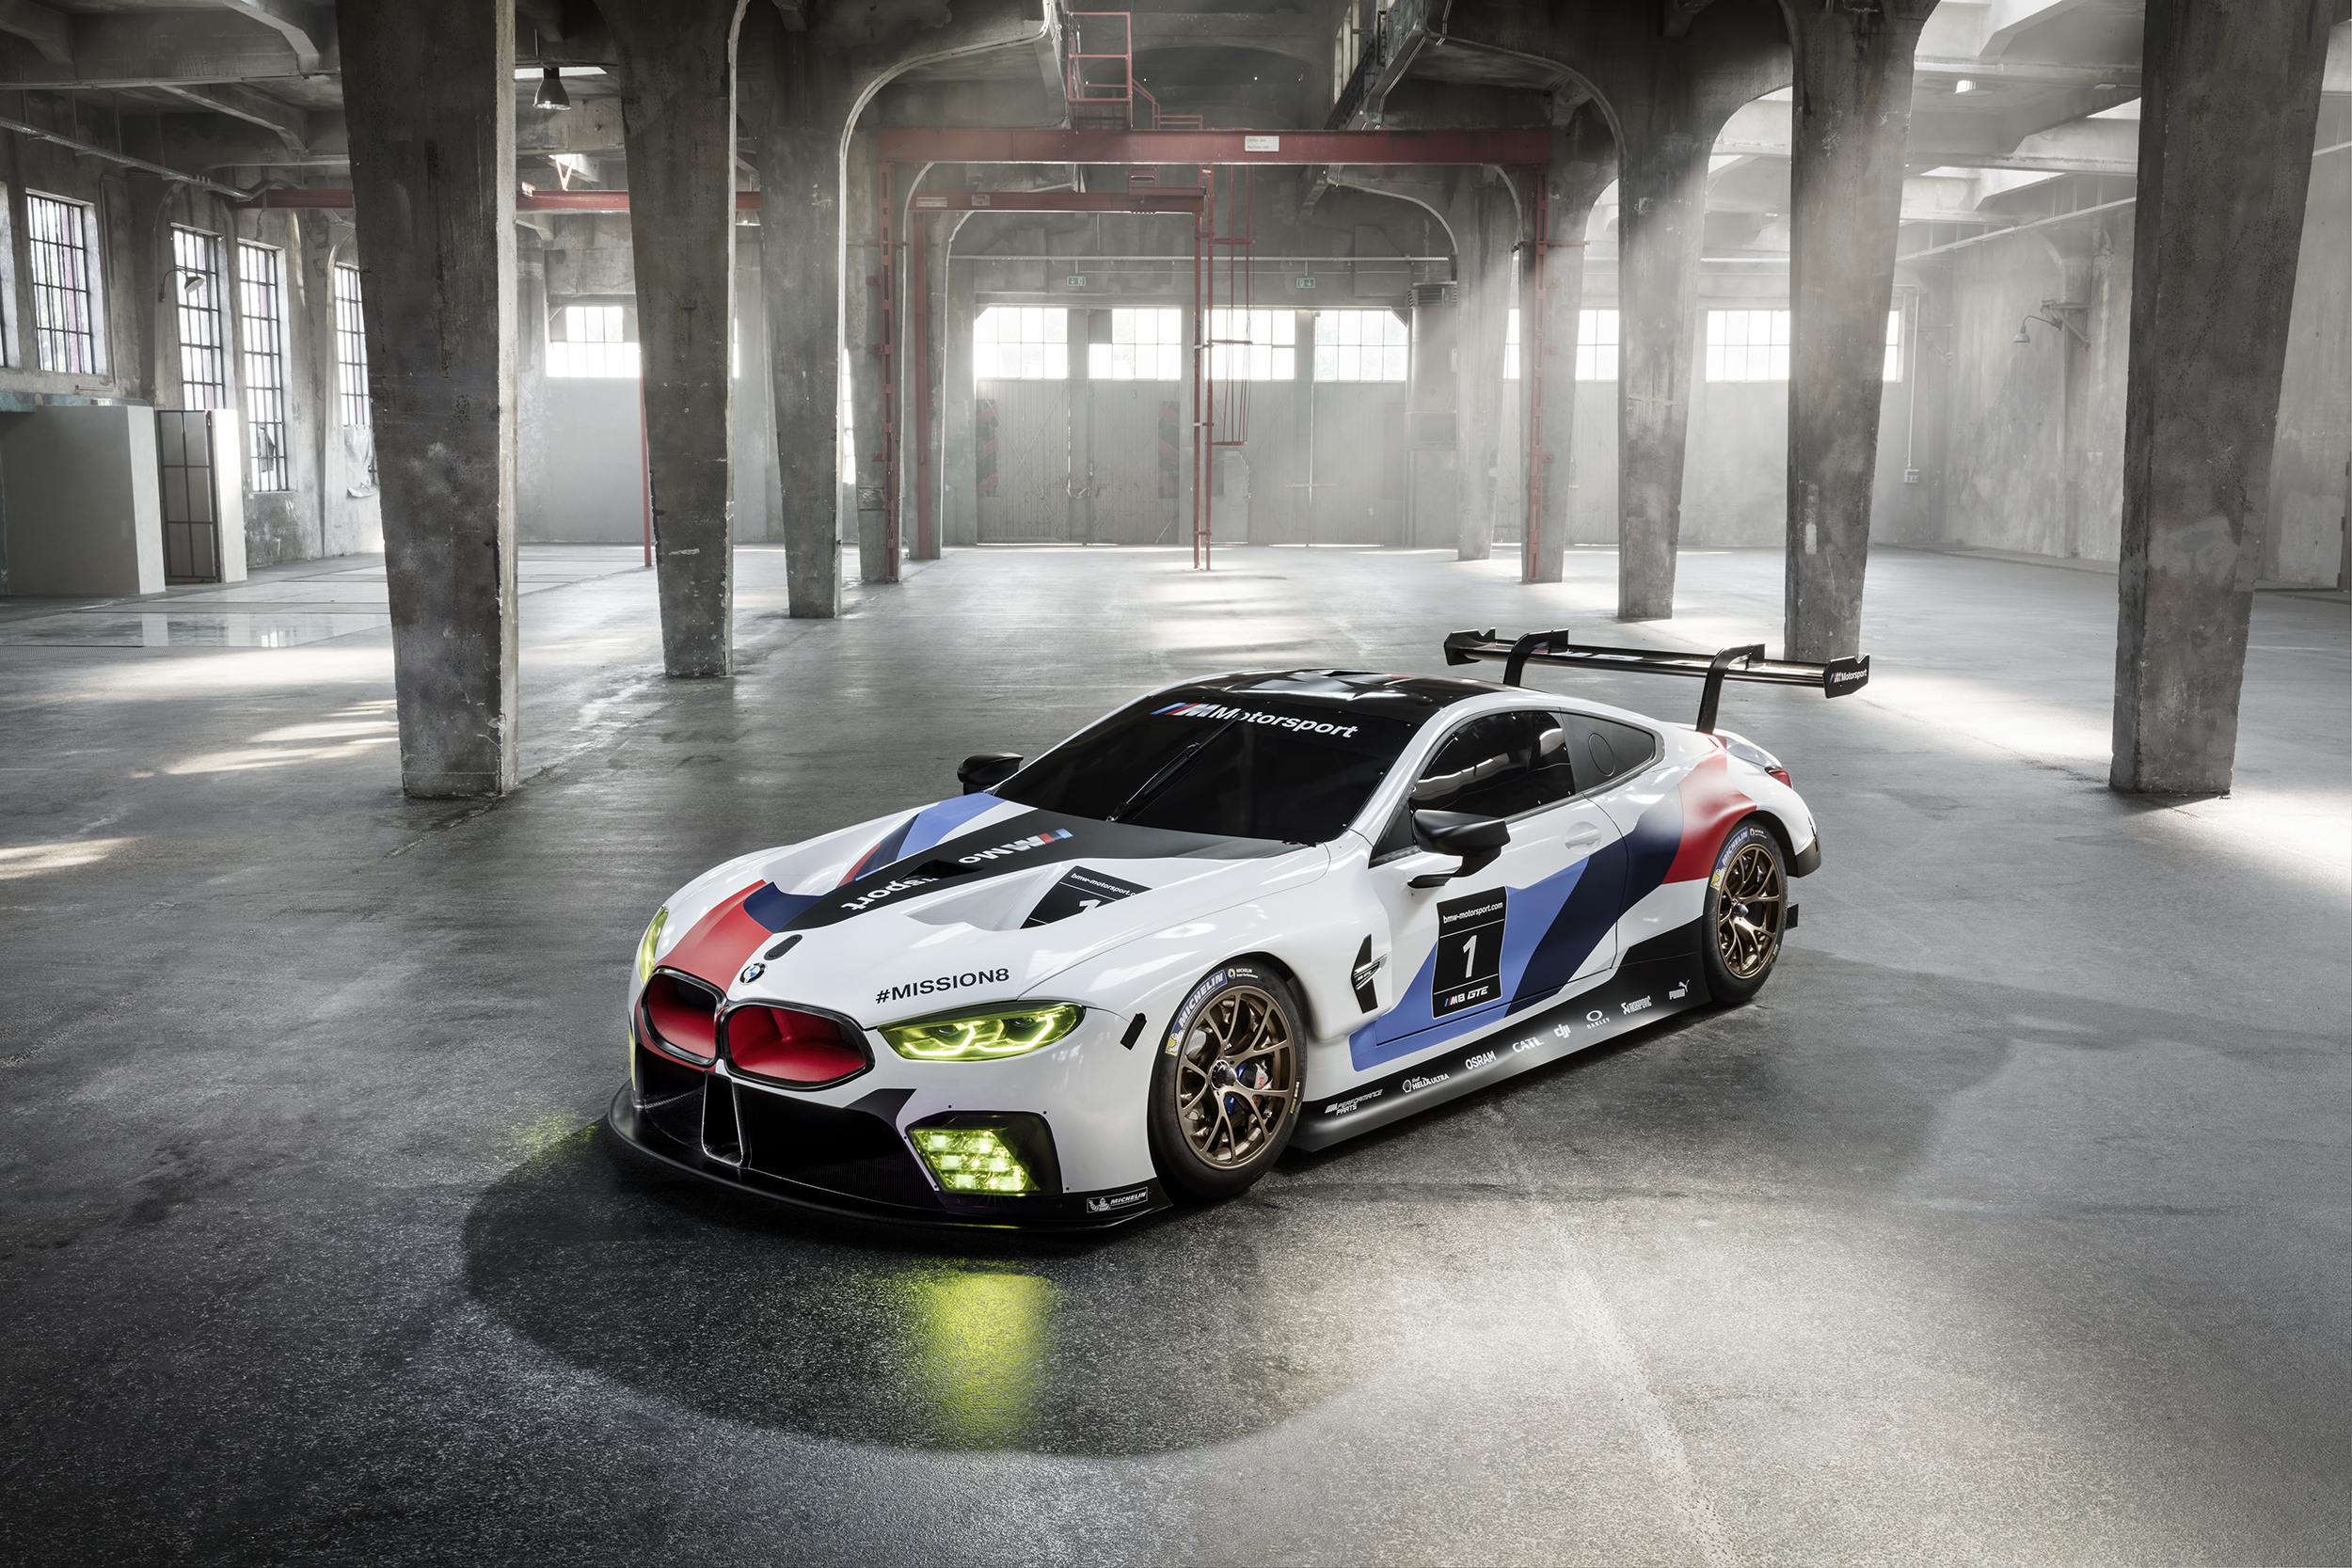 Speed And Style: The 2018 BMW M8 GTE